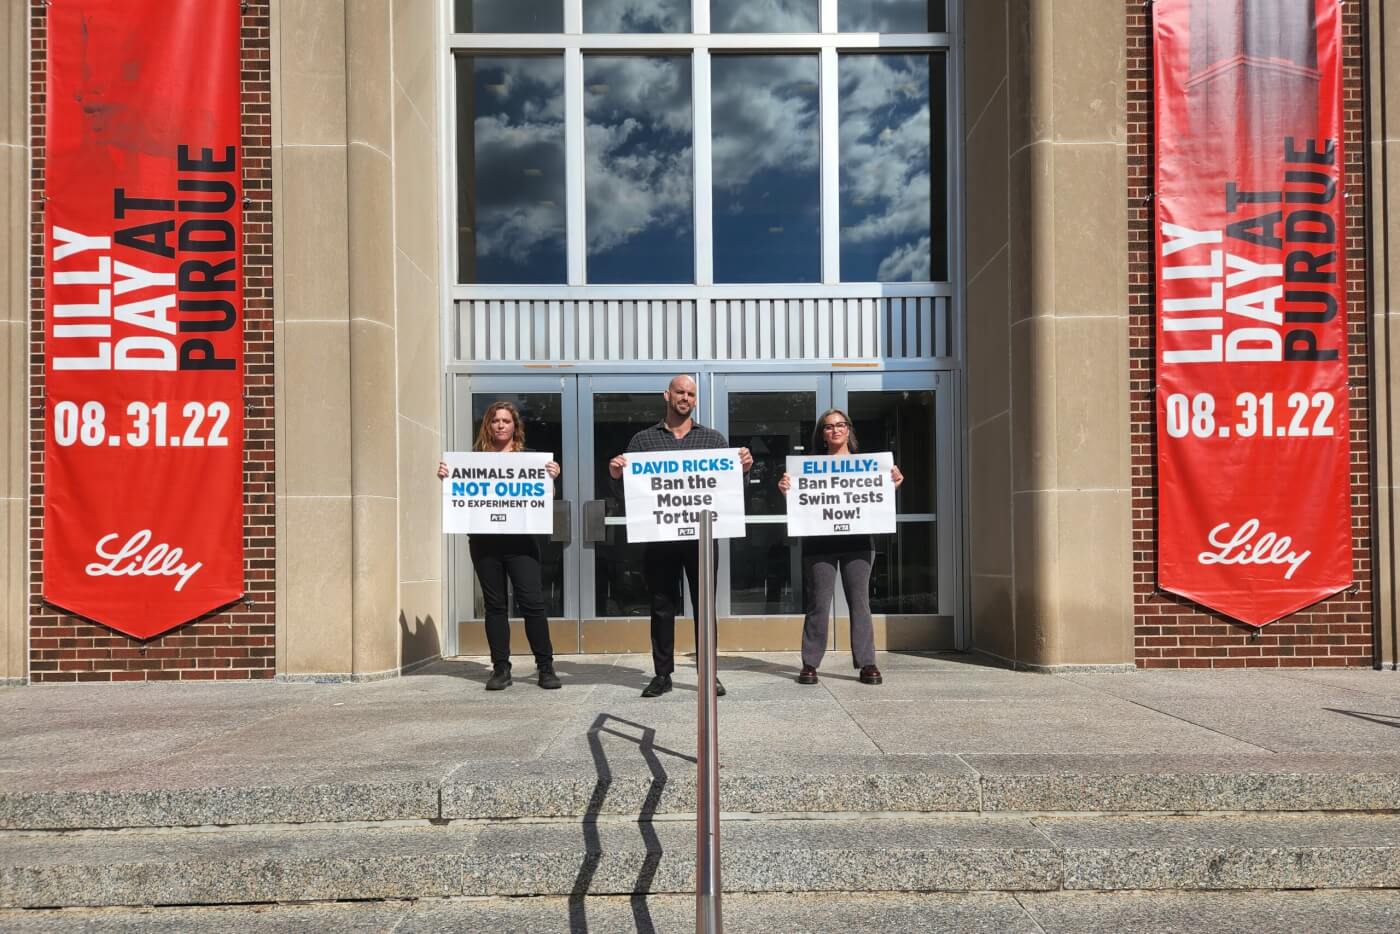 PETA supporters stand outside the Lilly Day at Purdue event with protest signs against the forced swim test